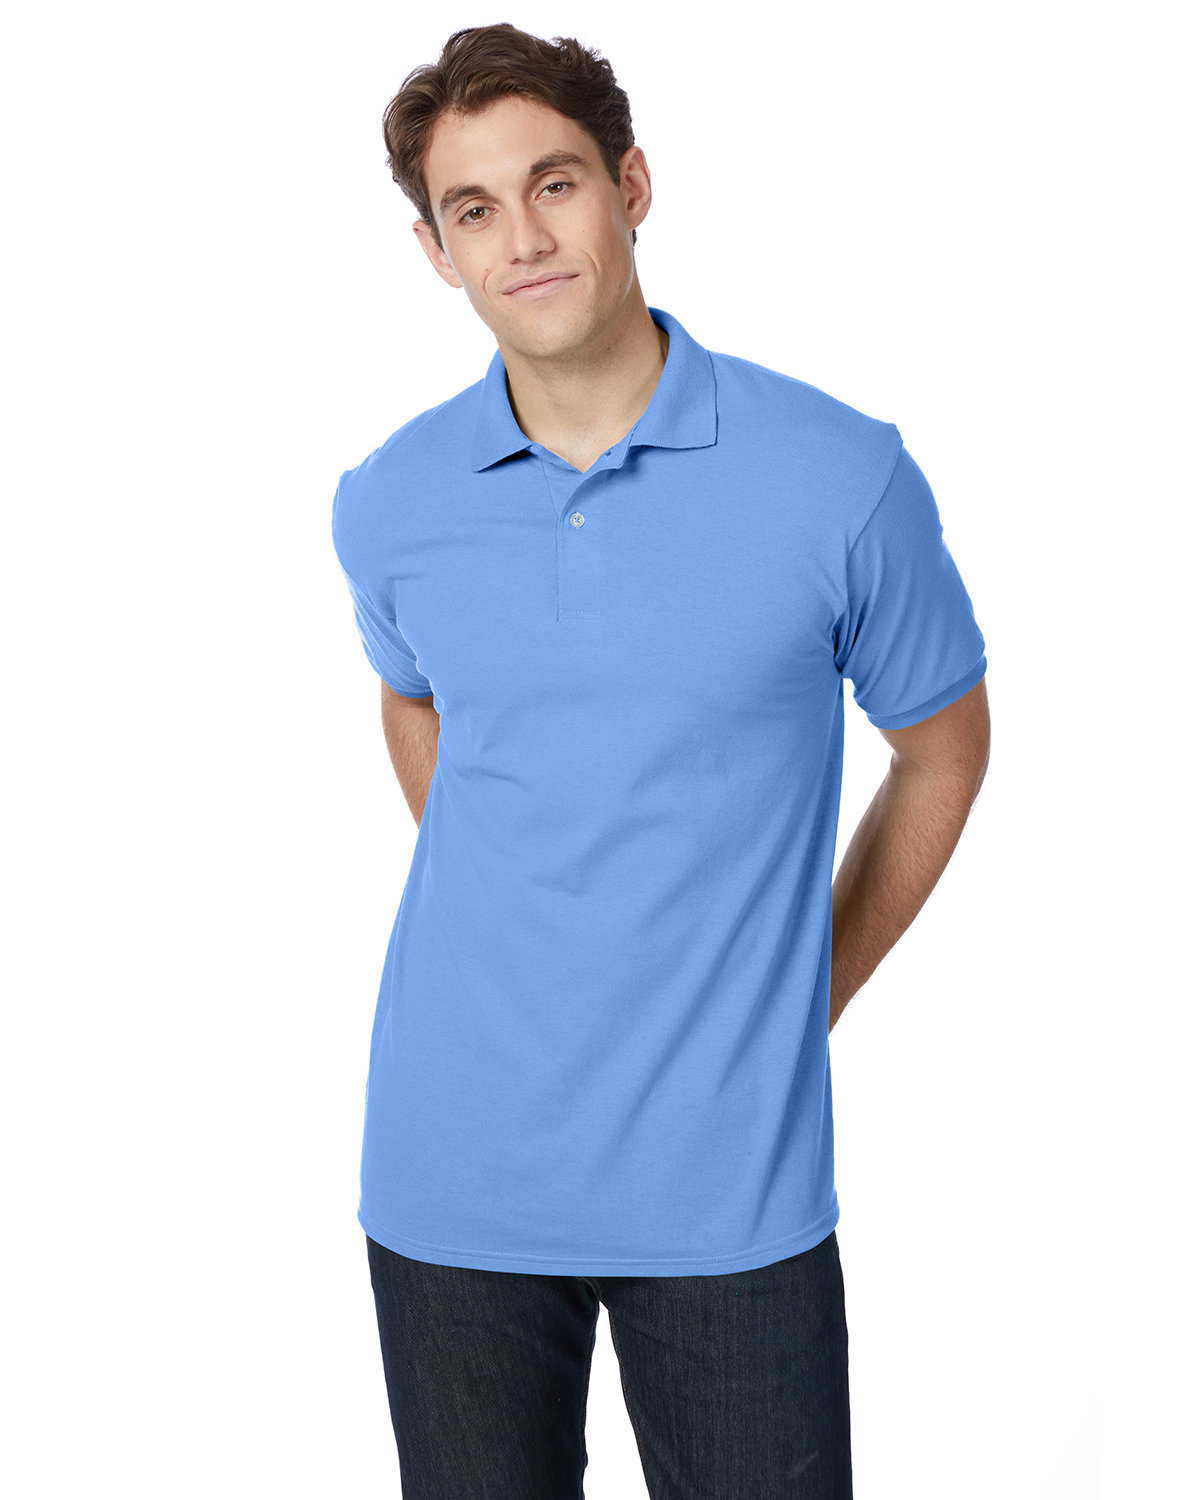 Hanes Adult 50/50 EcoSmart® Jersey Knit Polo | alphabroder